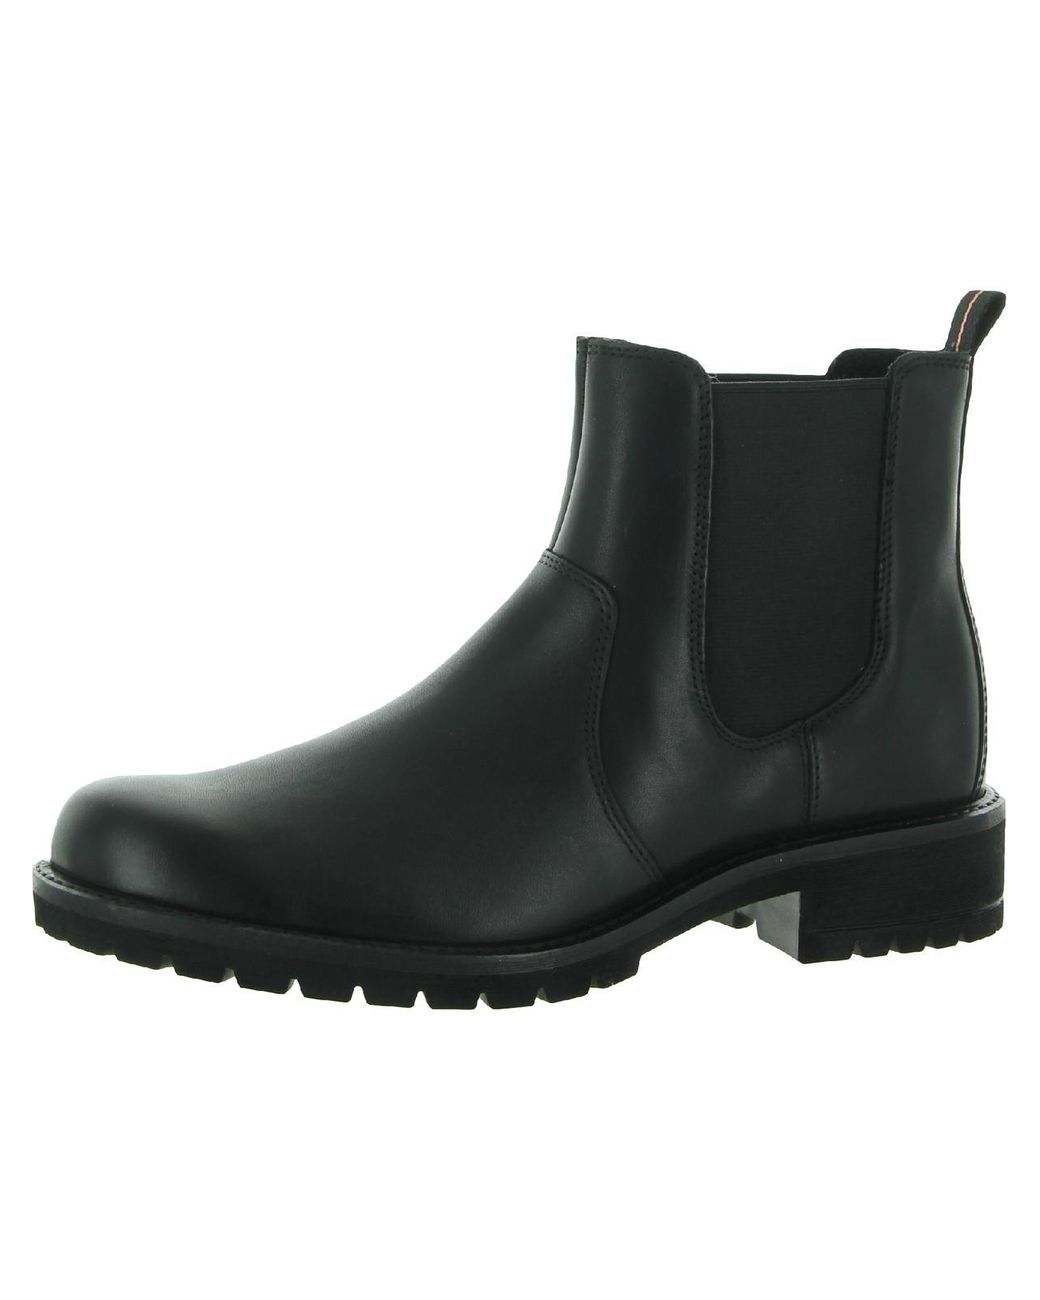 Ecco Elaina Leather Booties Chelsea Boots in Black | Lyst